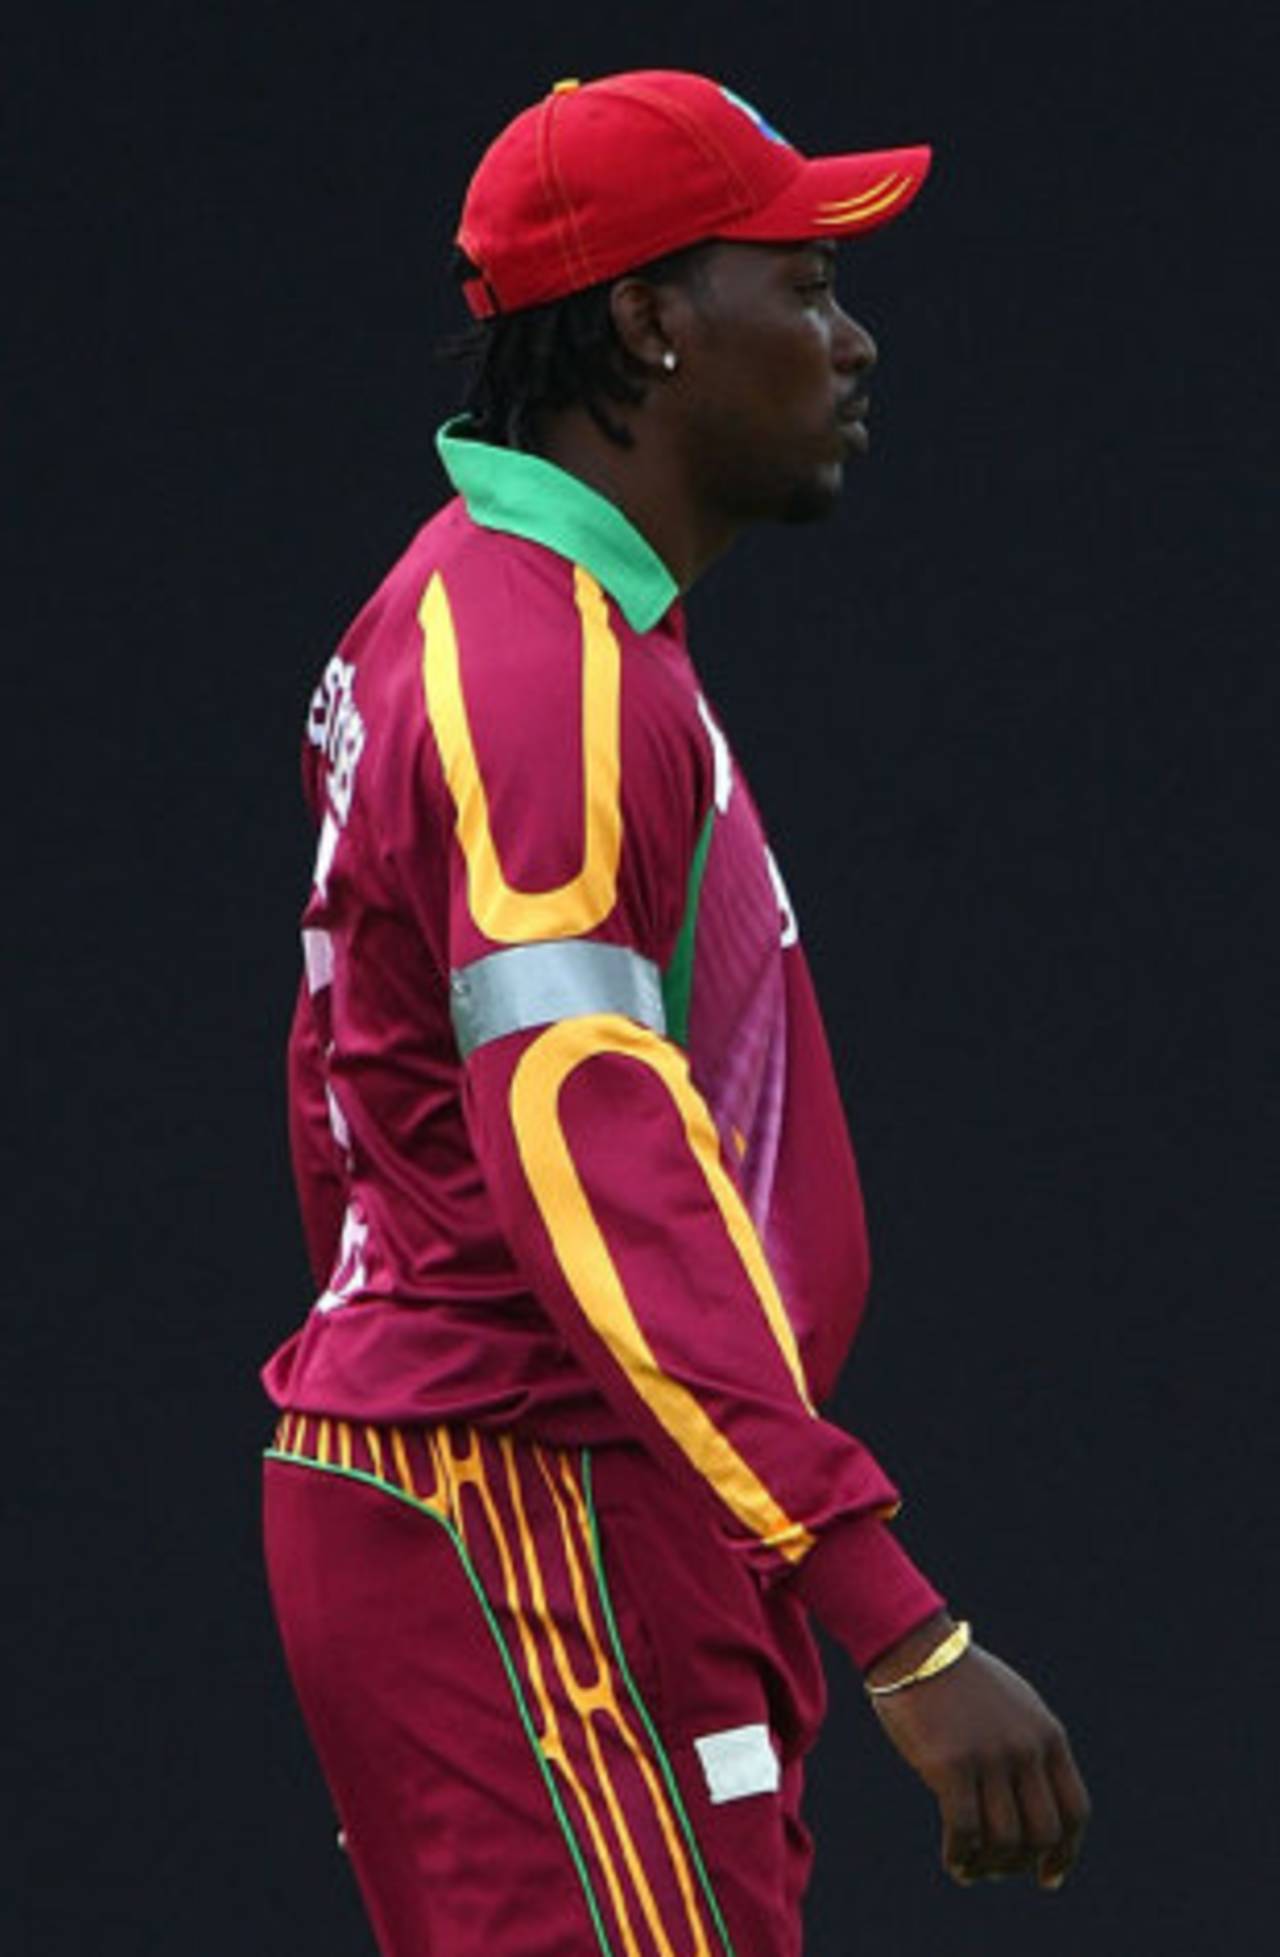 Chris Gayle with the logo on his shirt blocked out by tape as a protest against the board, West Indies v England, 1st ODI, Providence, March 20, 2009